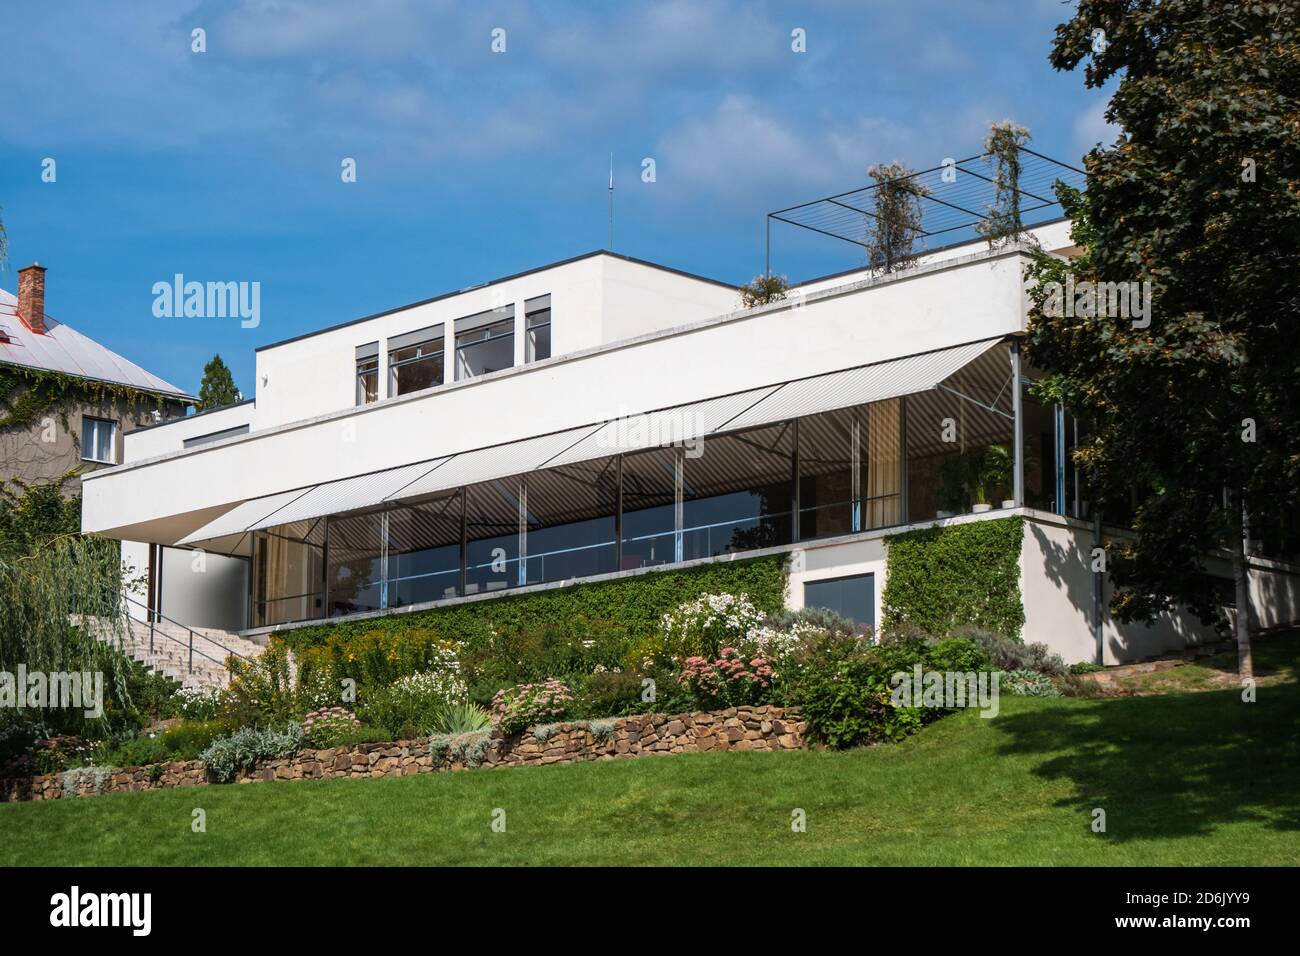 Brno, Czech Republic - September 13 2020: Villa Tugendhat Modernist House designed By Mies van der Rohe in the International Bauhaus Style viewed from Stock Photo